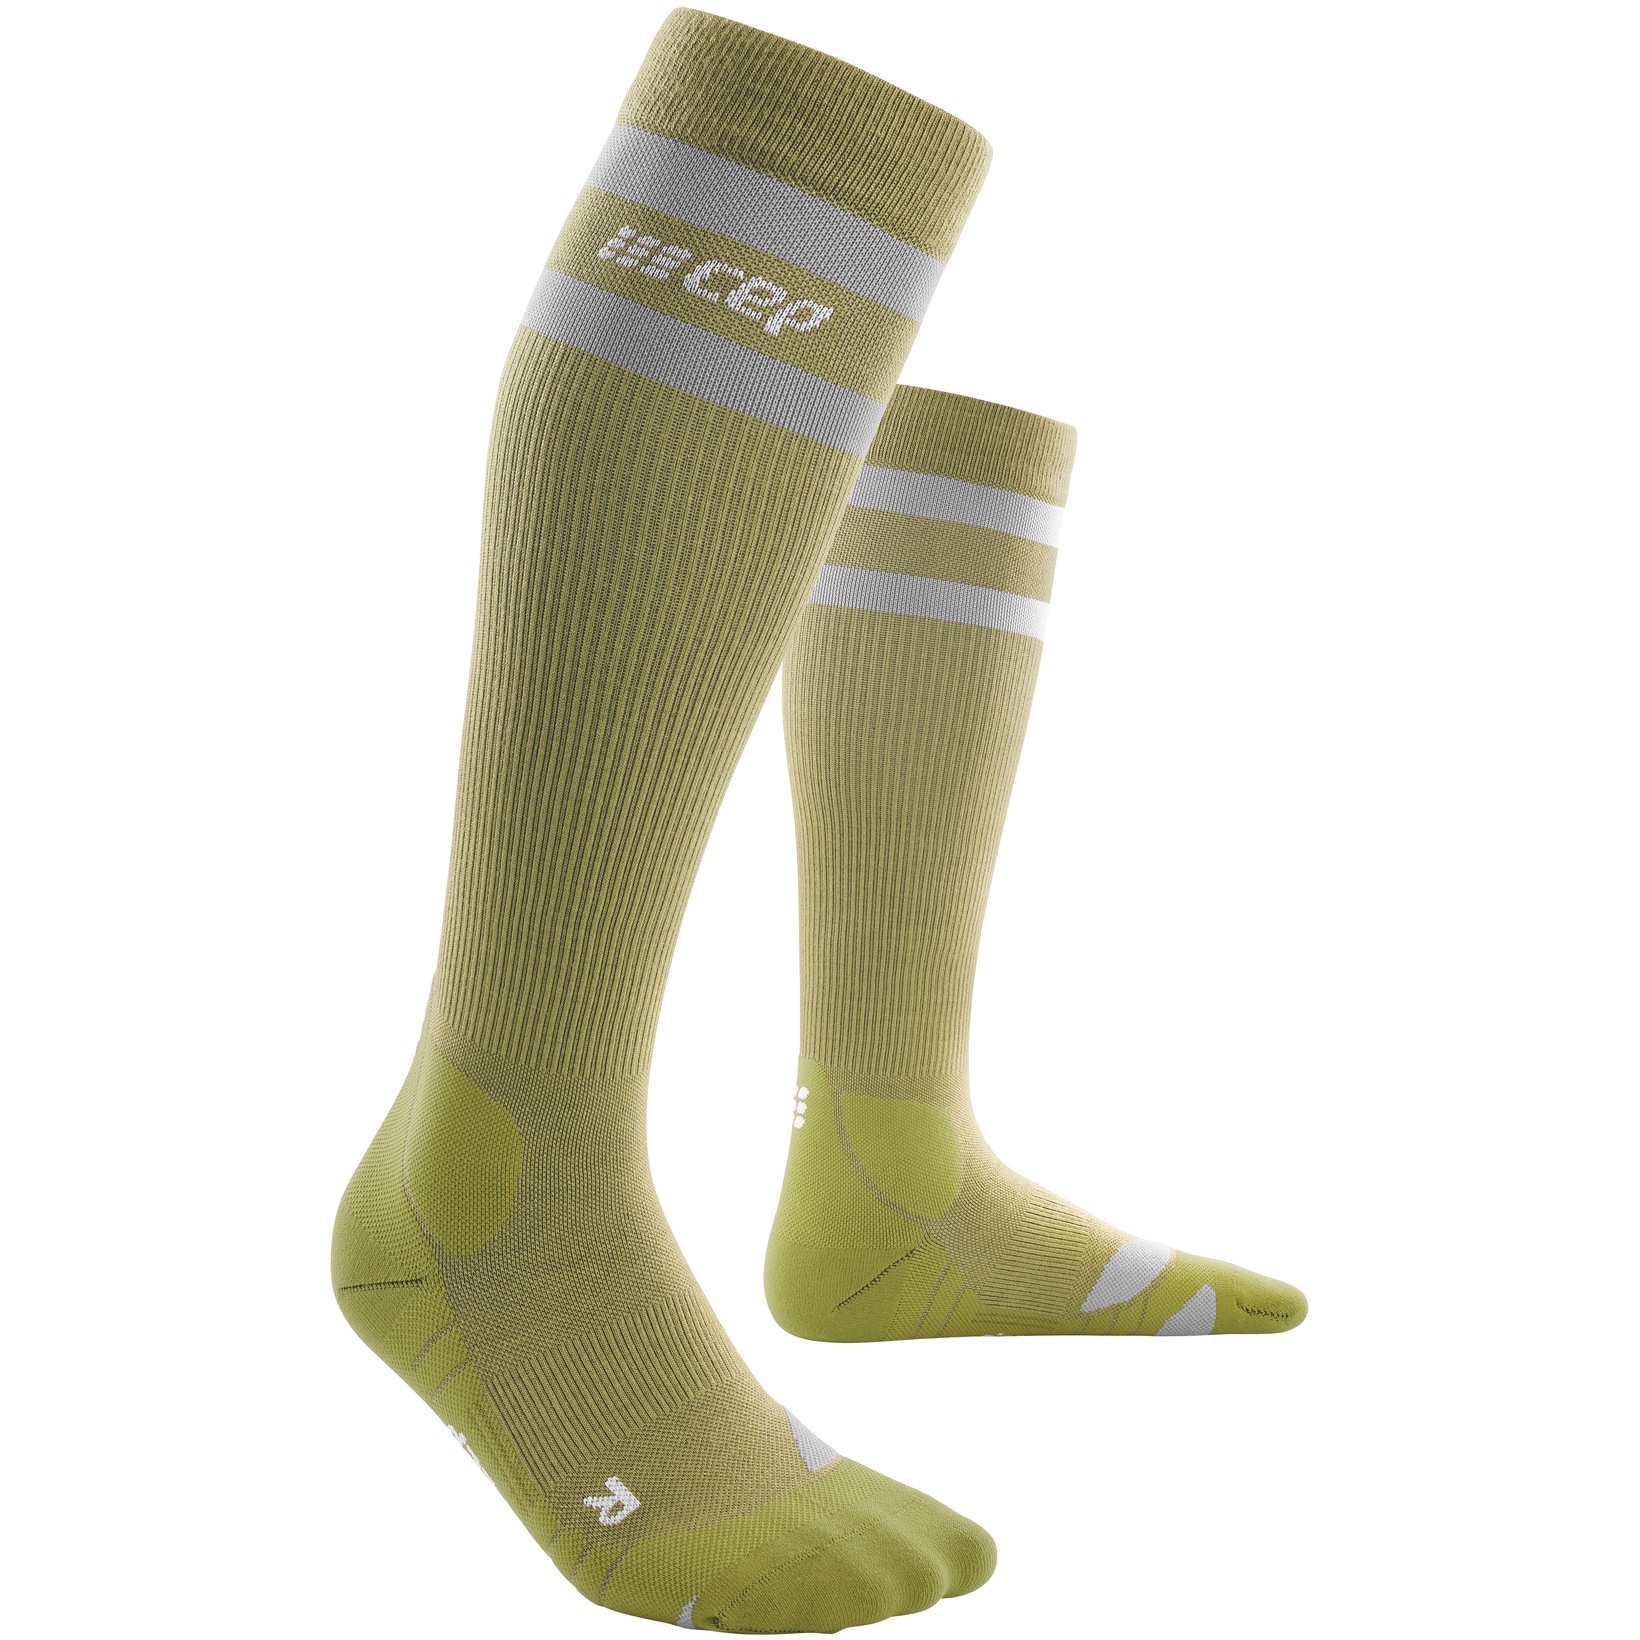 Picture of CEP Hiking 80s Tall Compression Socks - olive/grey